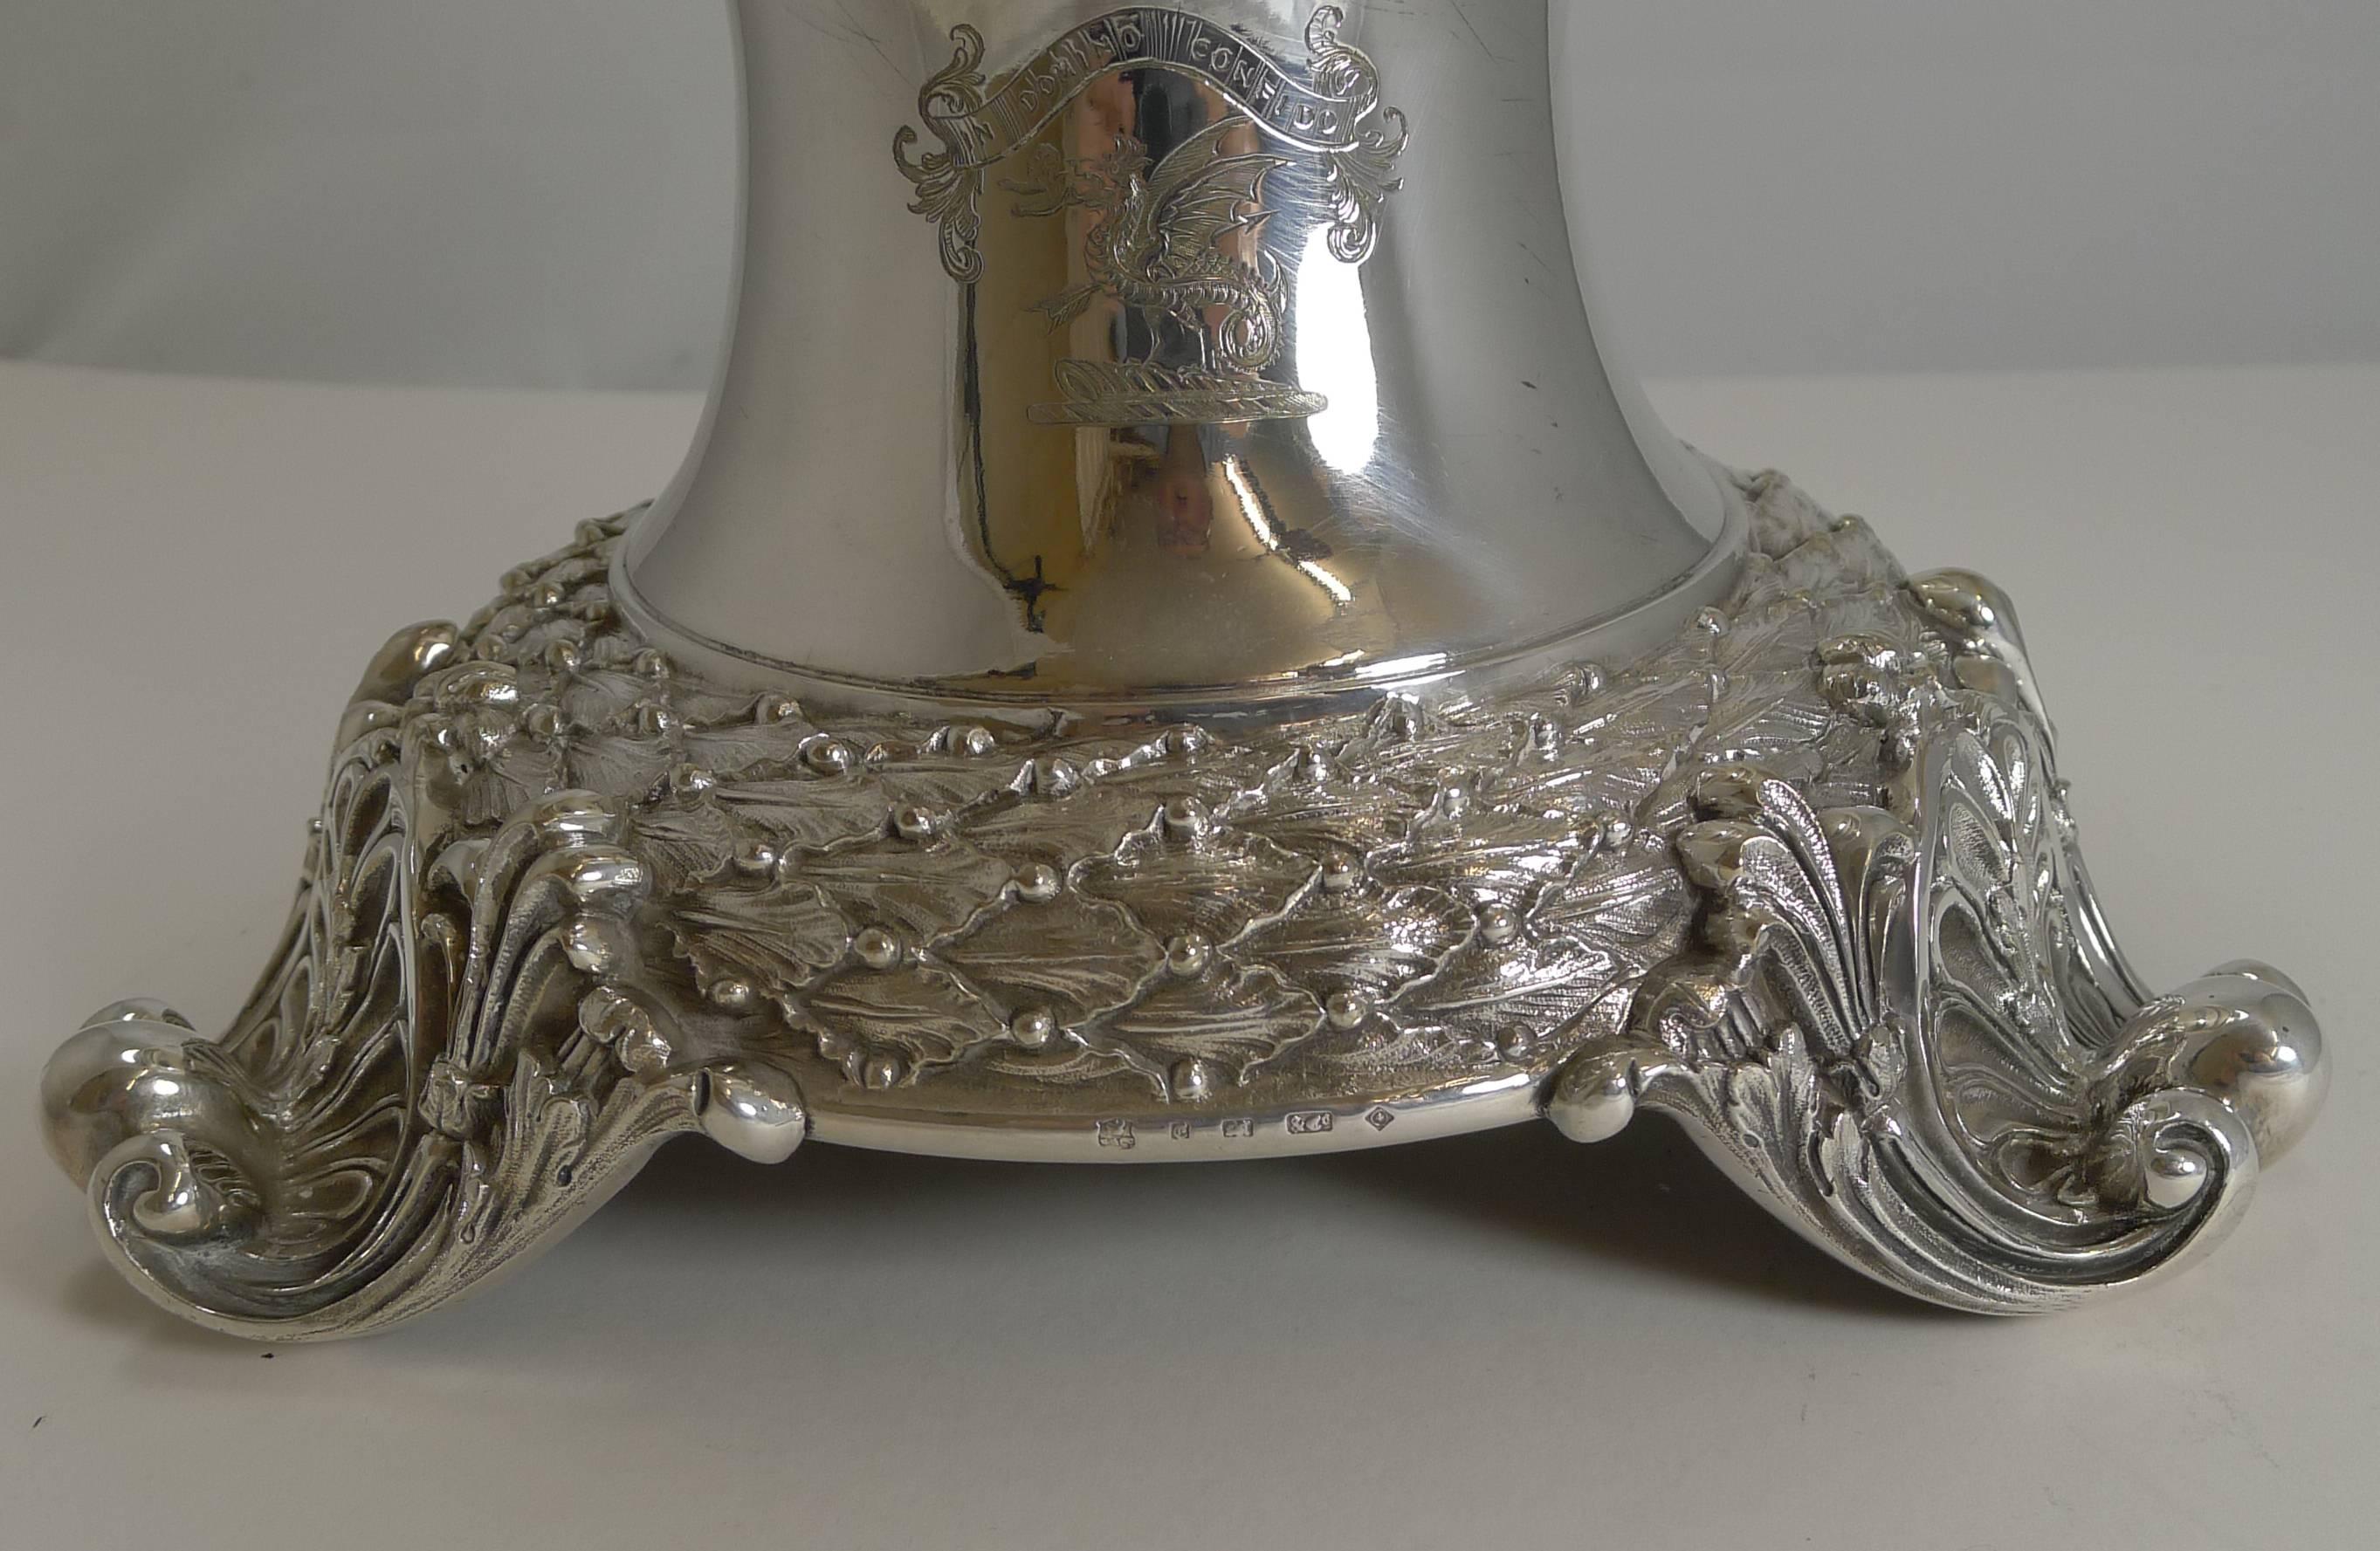 I would imagine this was a regimental presentation gift having had this top quality stand custom made in heavy cast silver plate by the finest of silversmith's Elkington and Co. The stand has a very regal armorial crest engraved to the front. The